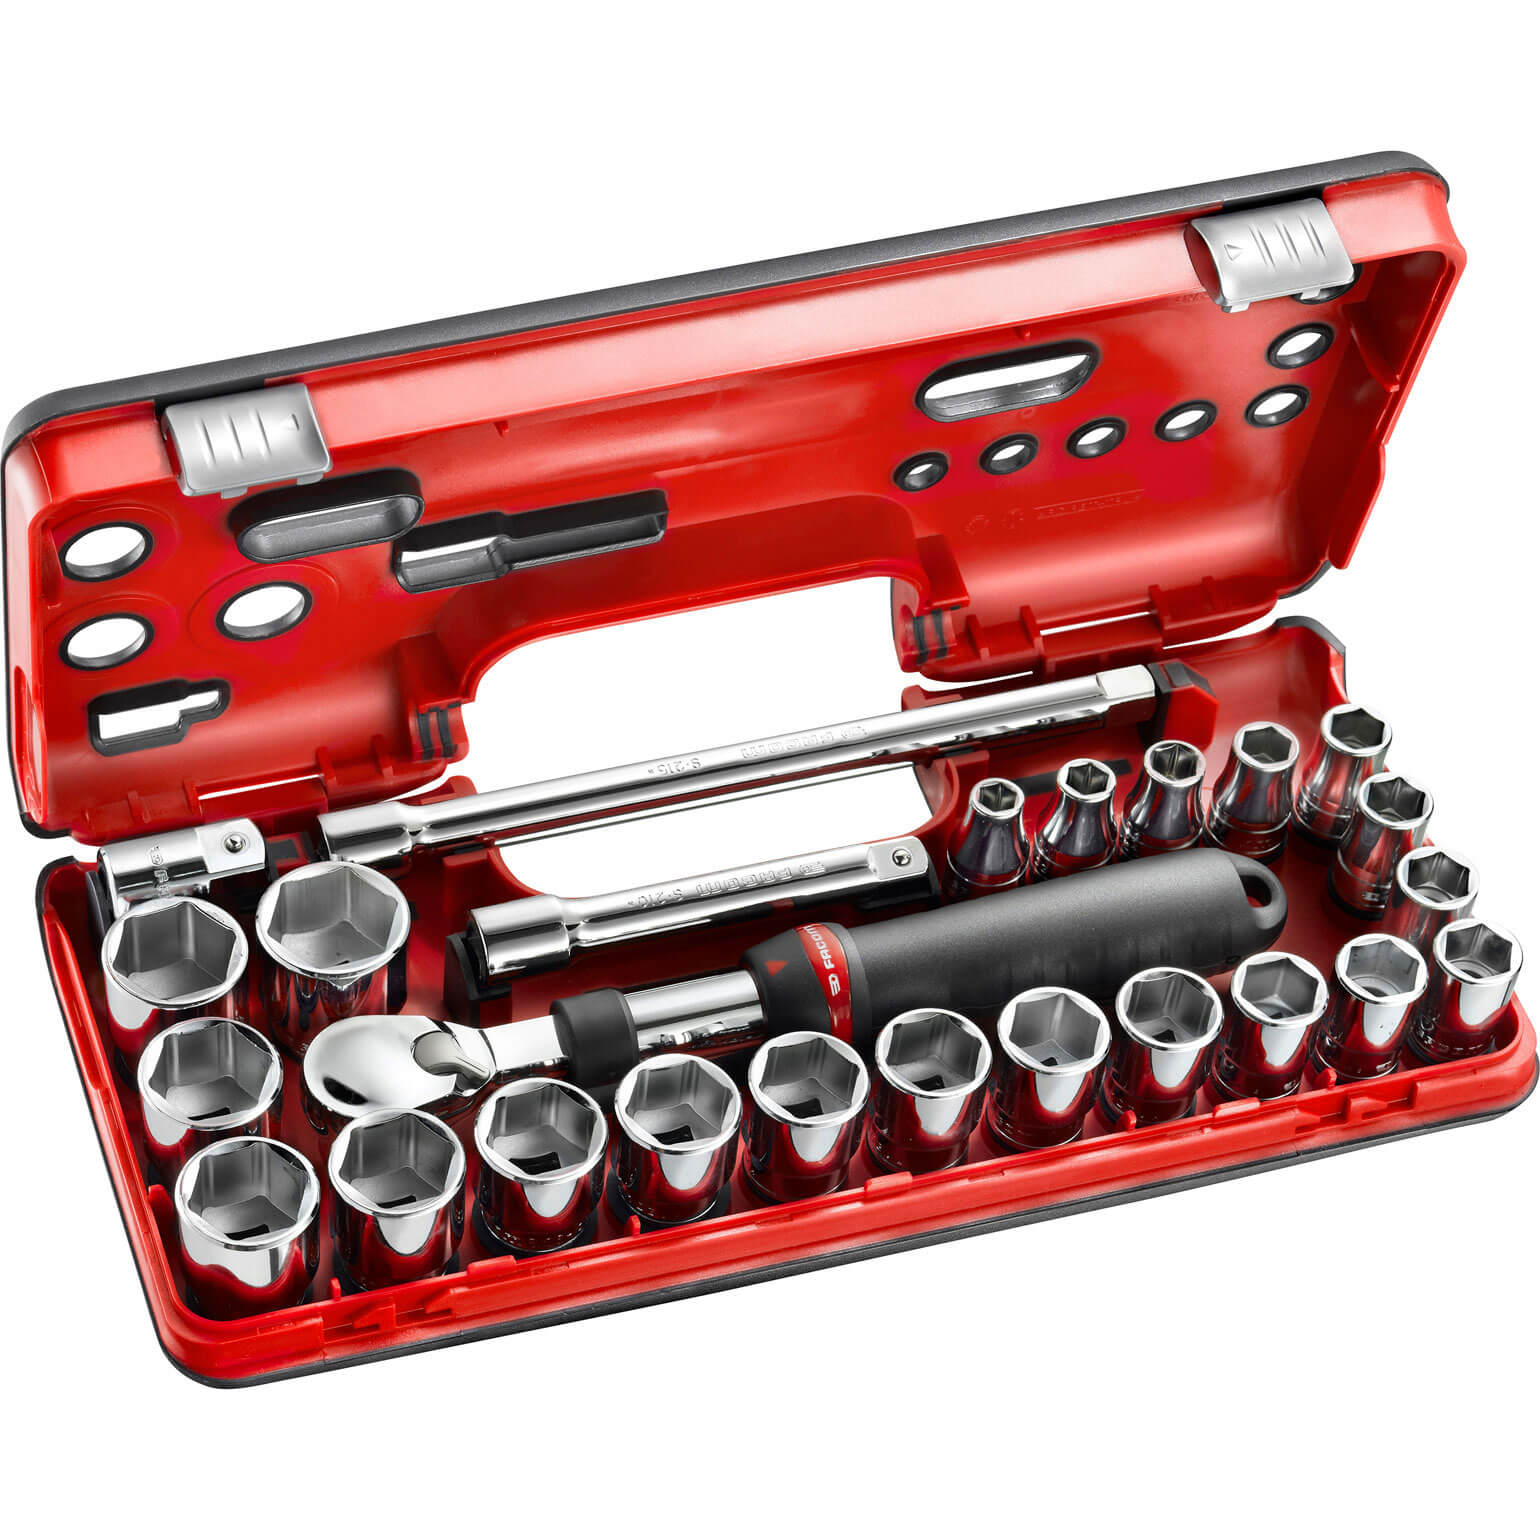 Image of Facom 25 Piece 1/2" Drive Extendable Ratchet and Socket Set Metric in Detection Box 1/2"